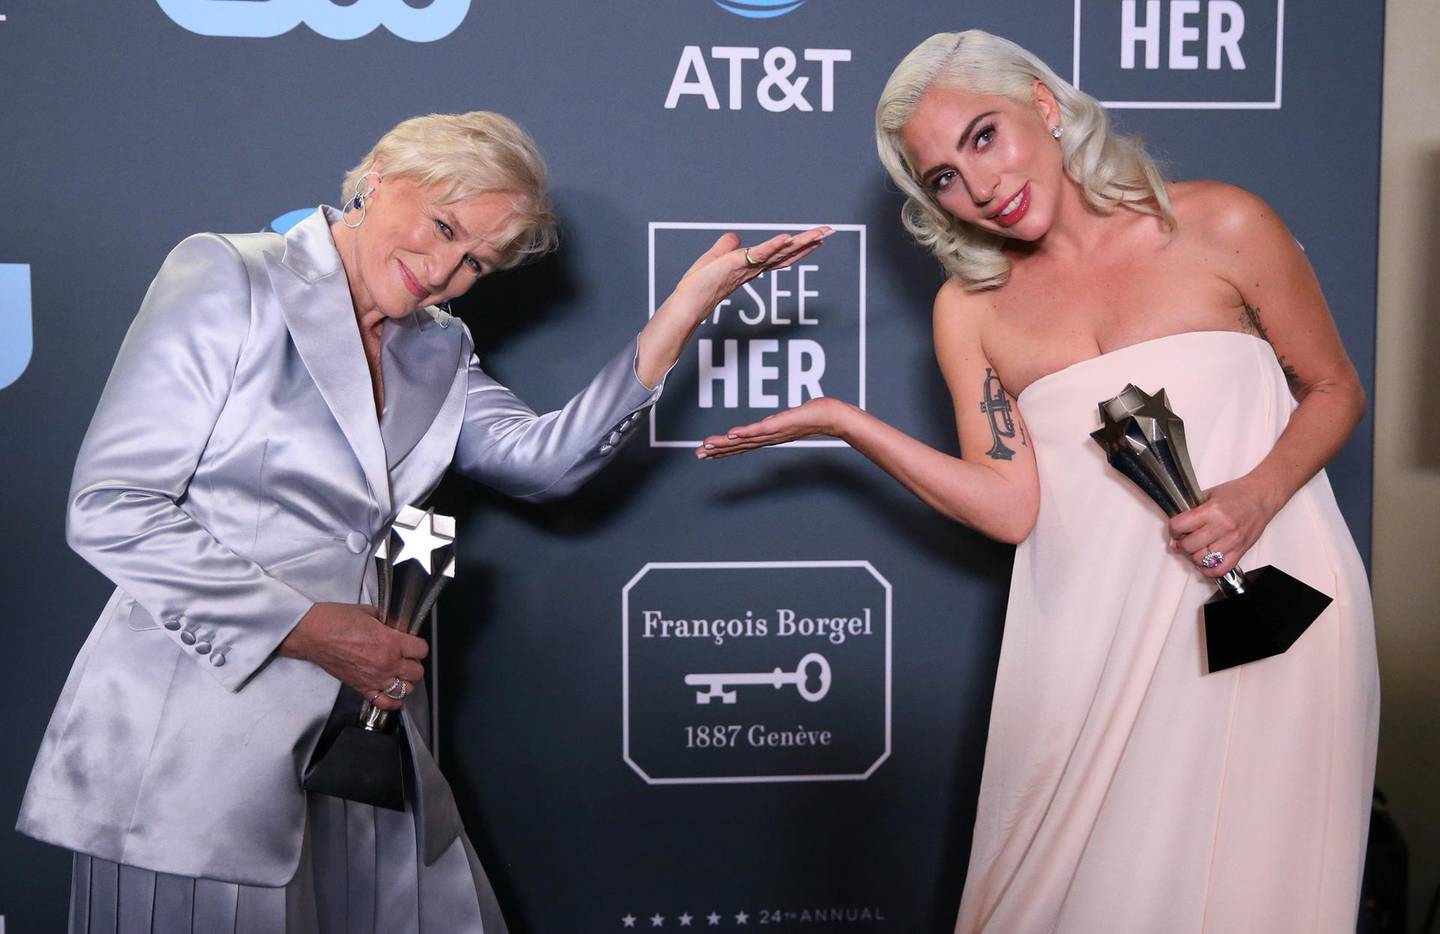 24th Critics Choice Awards – Photo Room – Santa Monica, California, U.S., January 13, 2019 - Glenn Close and Lady Gaga pose backstage with their Best Actress awards for "The Wife" and "A Star is Born". REUTERS/Danny Moloshok     TPX IMAGES OF THE DAY